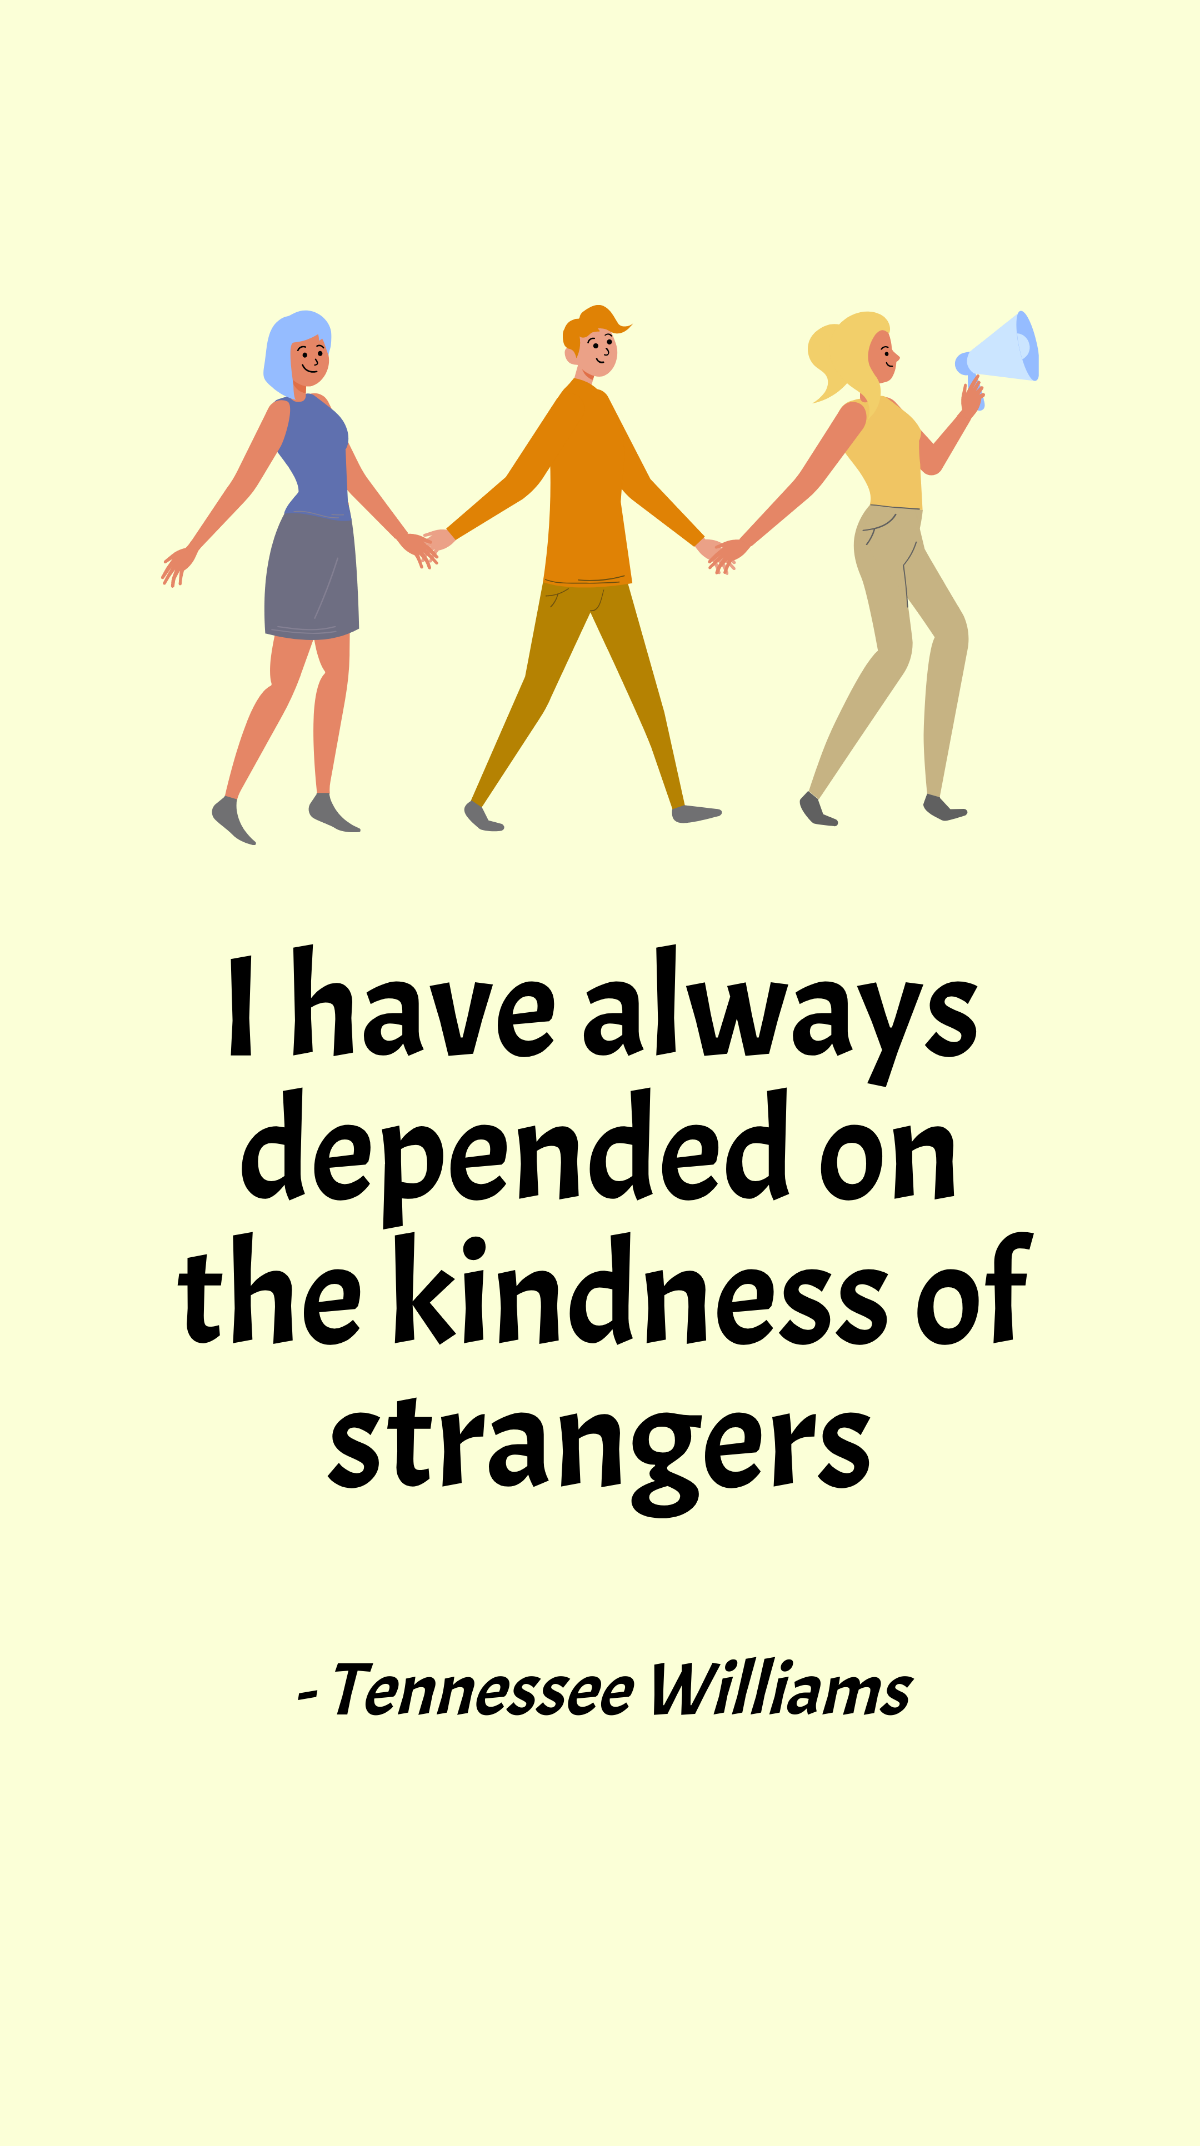 Tennessee Williams - I have always depended on the kindness of strangers